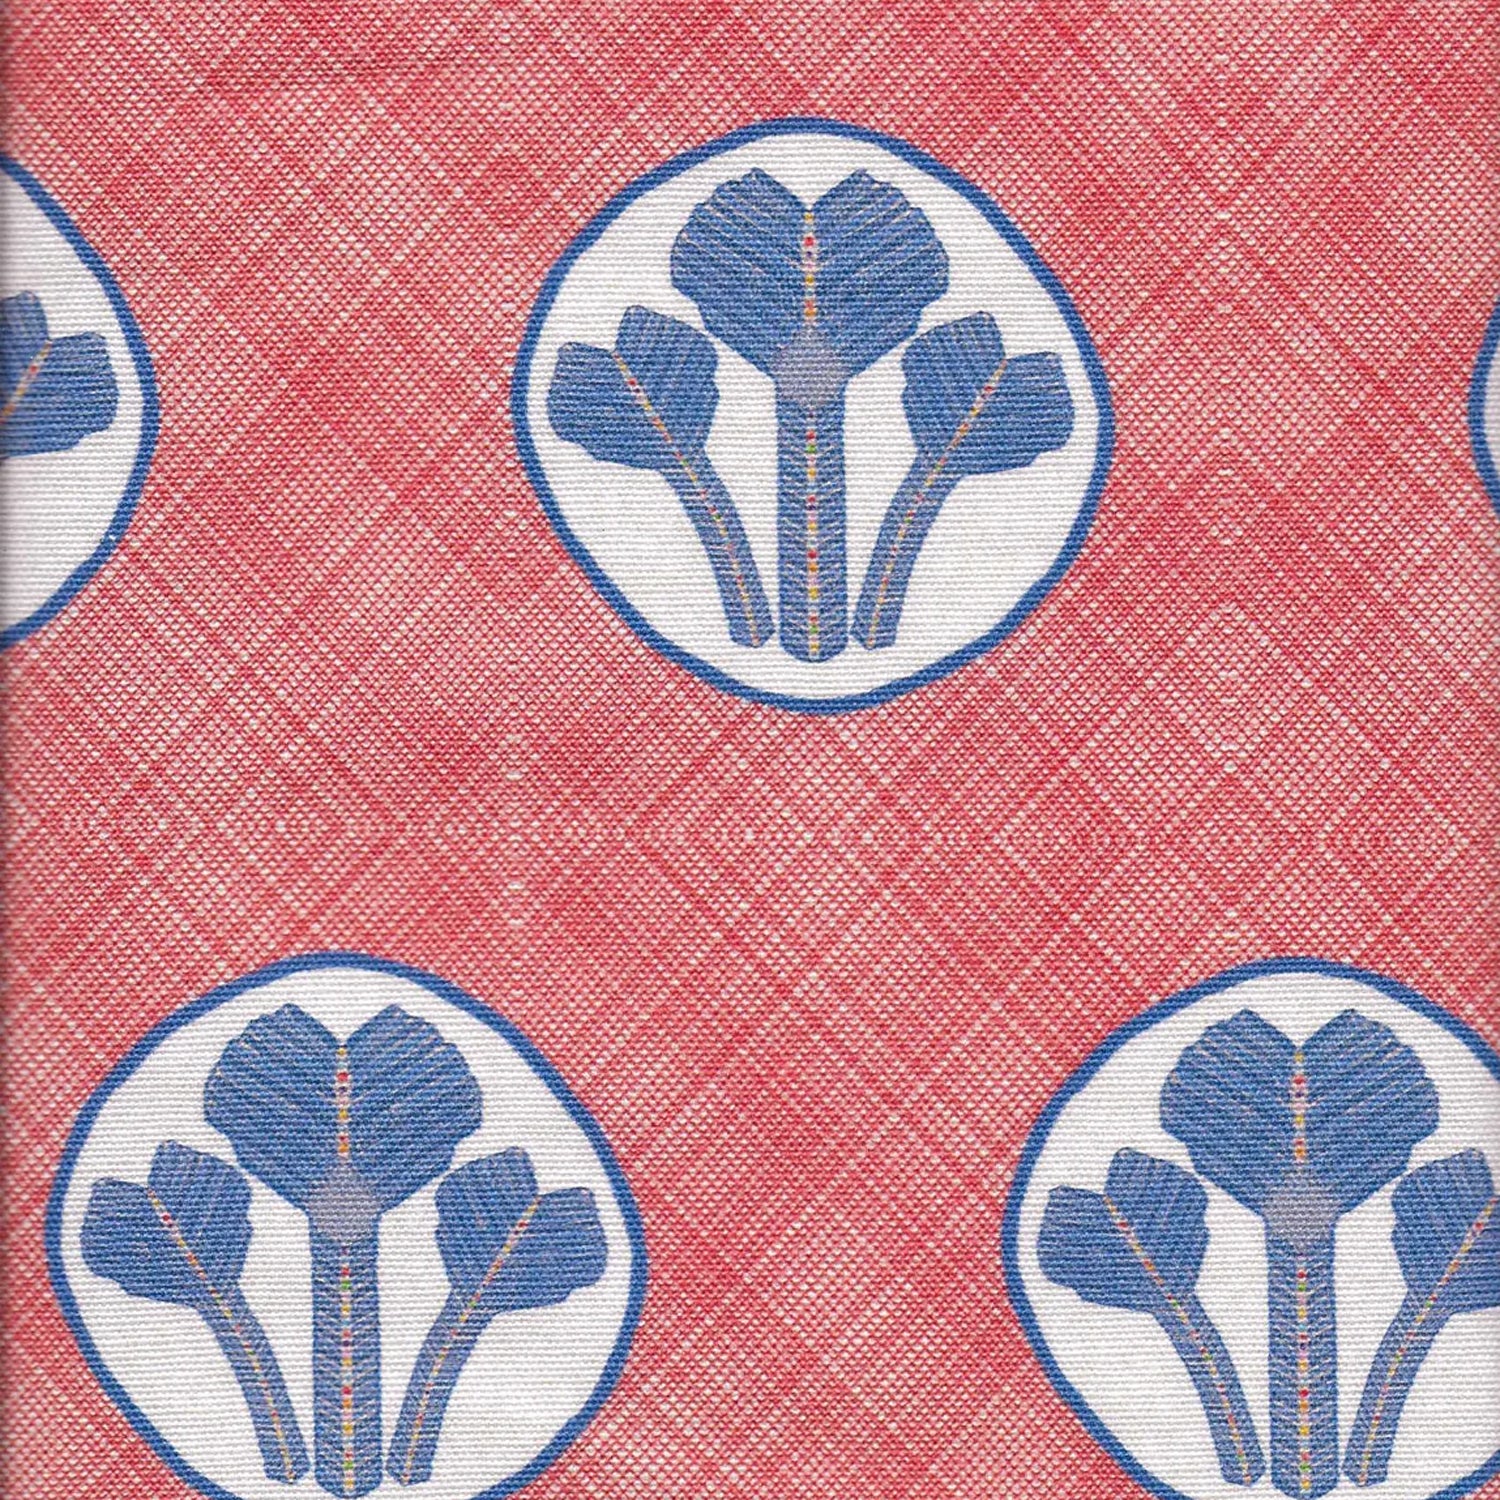 Detail of fabric in a repeating curvilinear floral print in blue and cream on a red field.